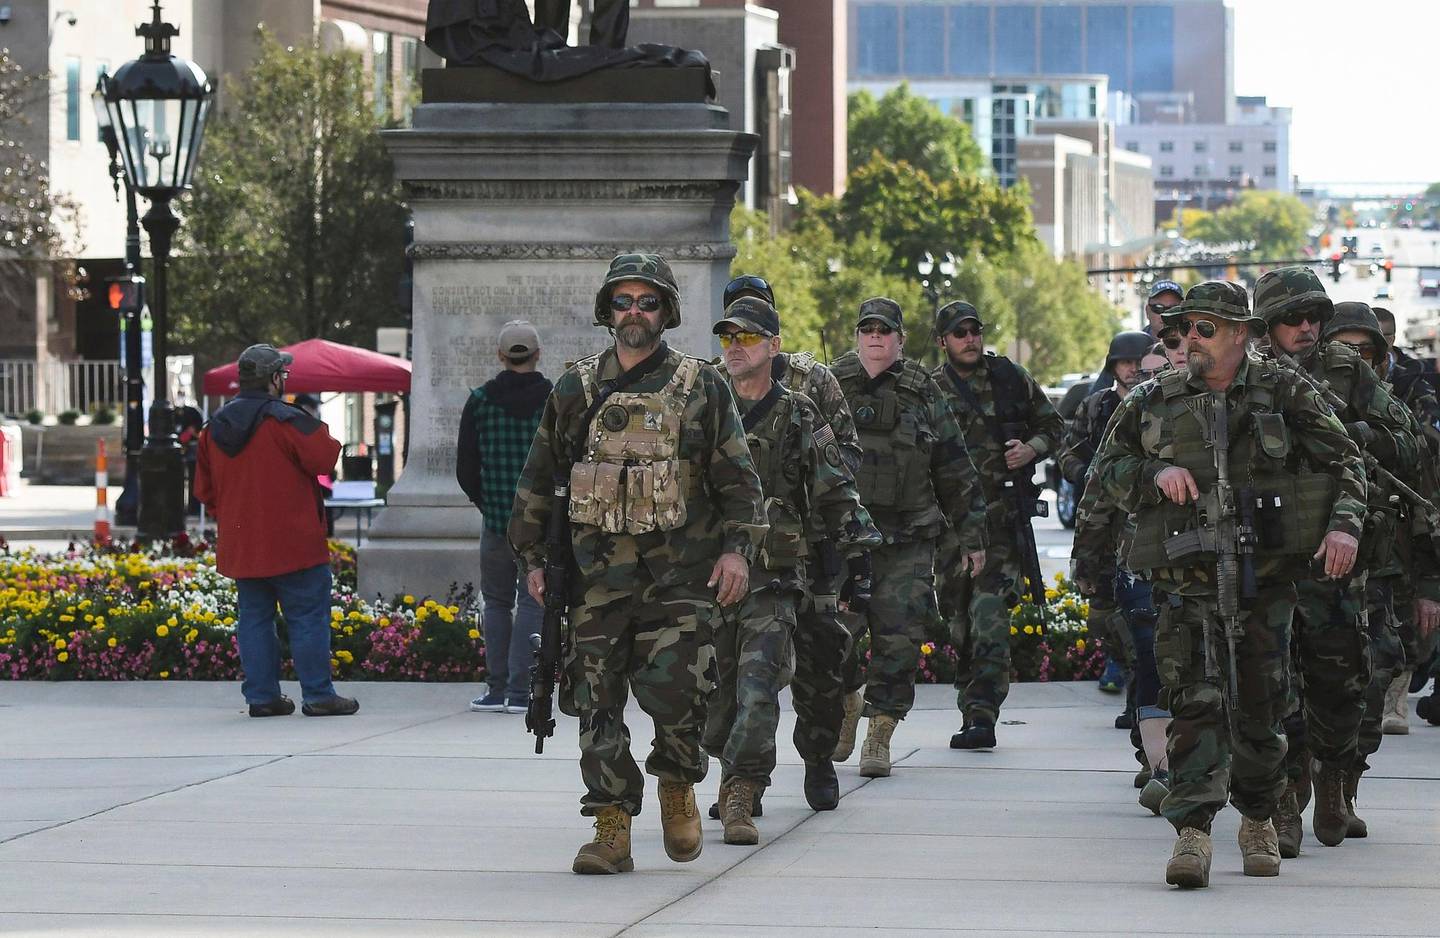 Michigan Home Guard militia members march toward the State Capitol to show their support for gun rights at the Second Amendment March at the State Capitol, Thursday, Sept. 17, 2020, in Lansing, Mich. Dozens gathered on the lawn of the Michigan Capitol to rally in support of their right to bear arms as well as to decry efforts undertaken by the state to rein in the coronavirus pandemic  efforts they say infringe upon their freedom. (Matthew Dae Smith/Lansing State Journal via AP)